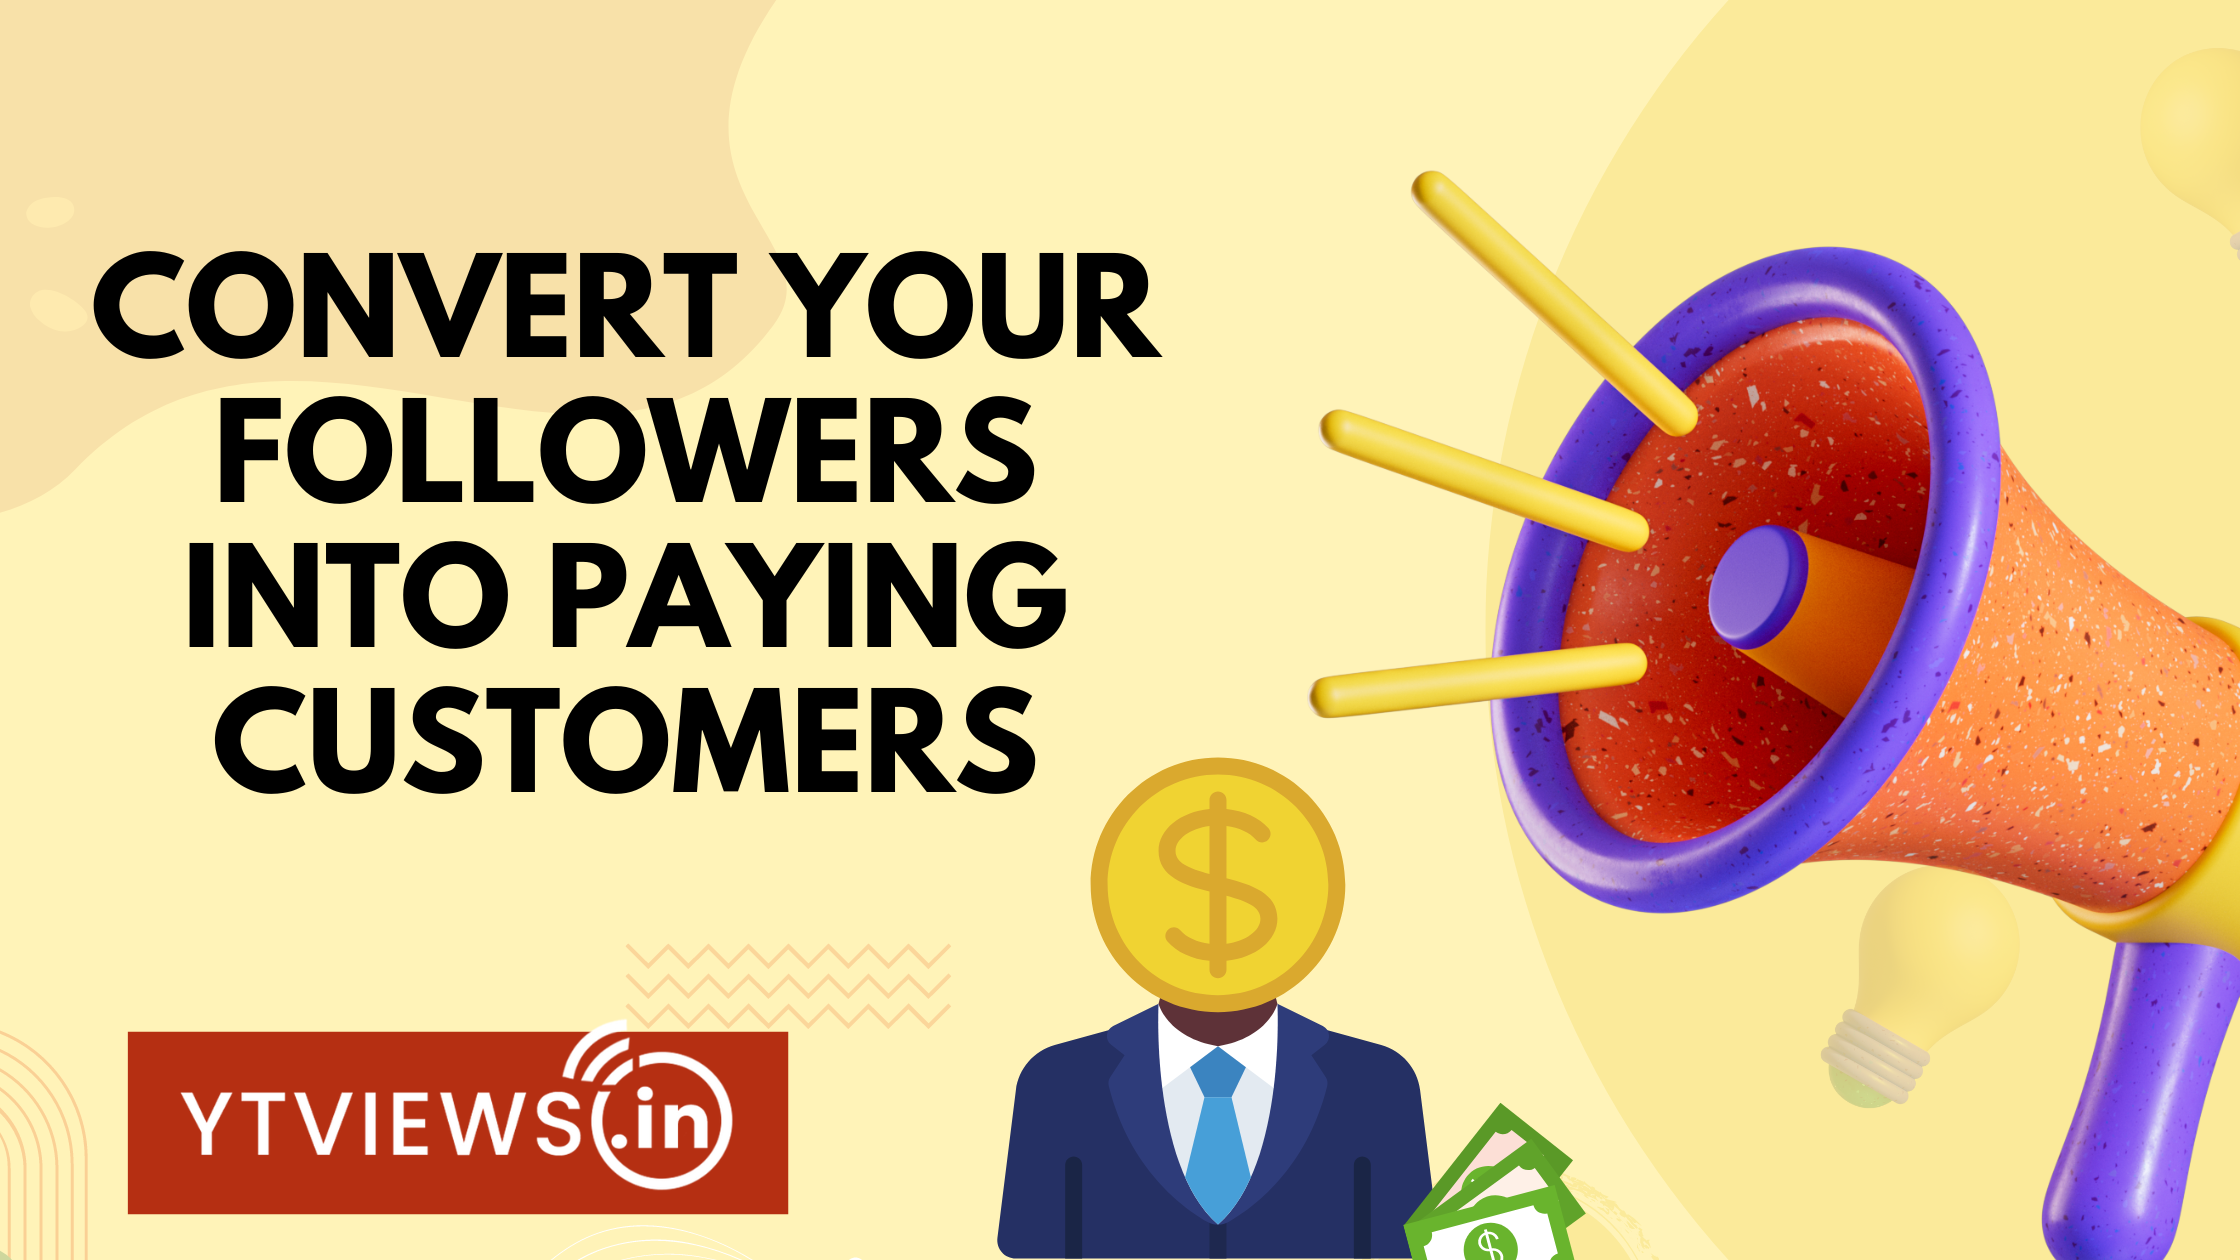 The future of Social Commerce: Convert your followers into paying customers